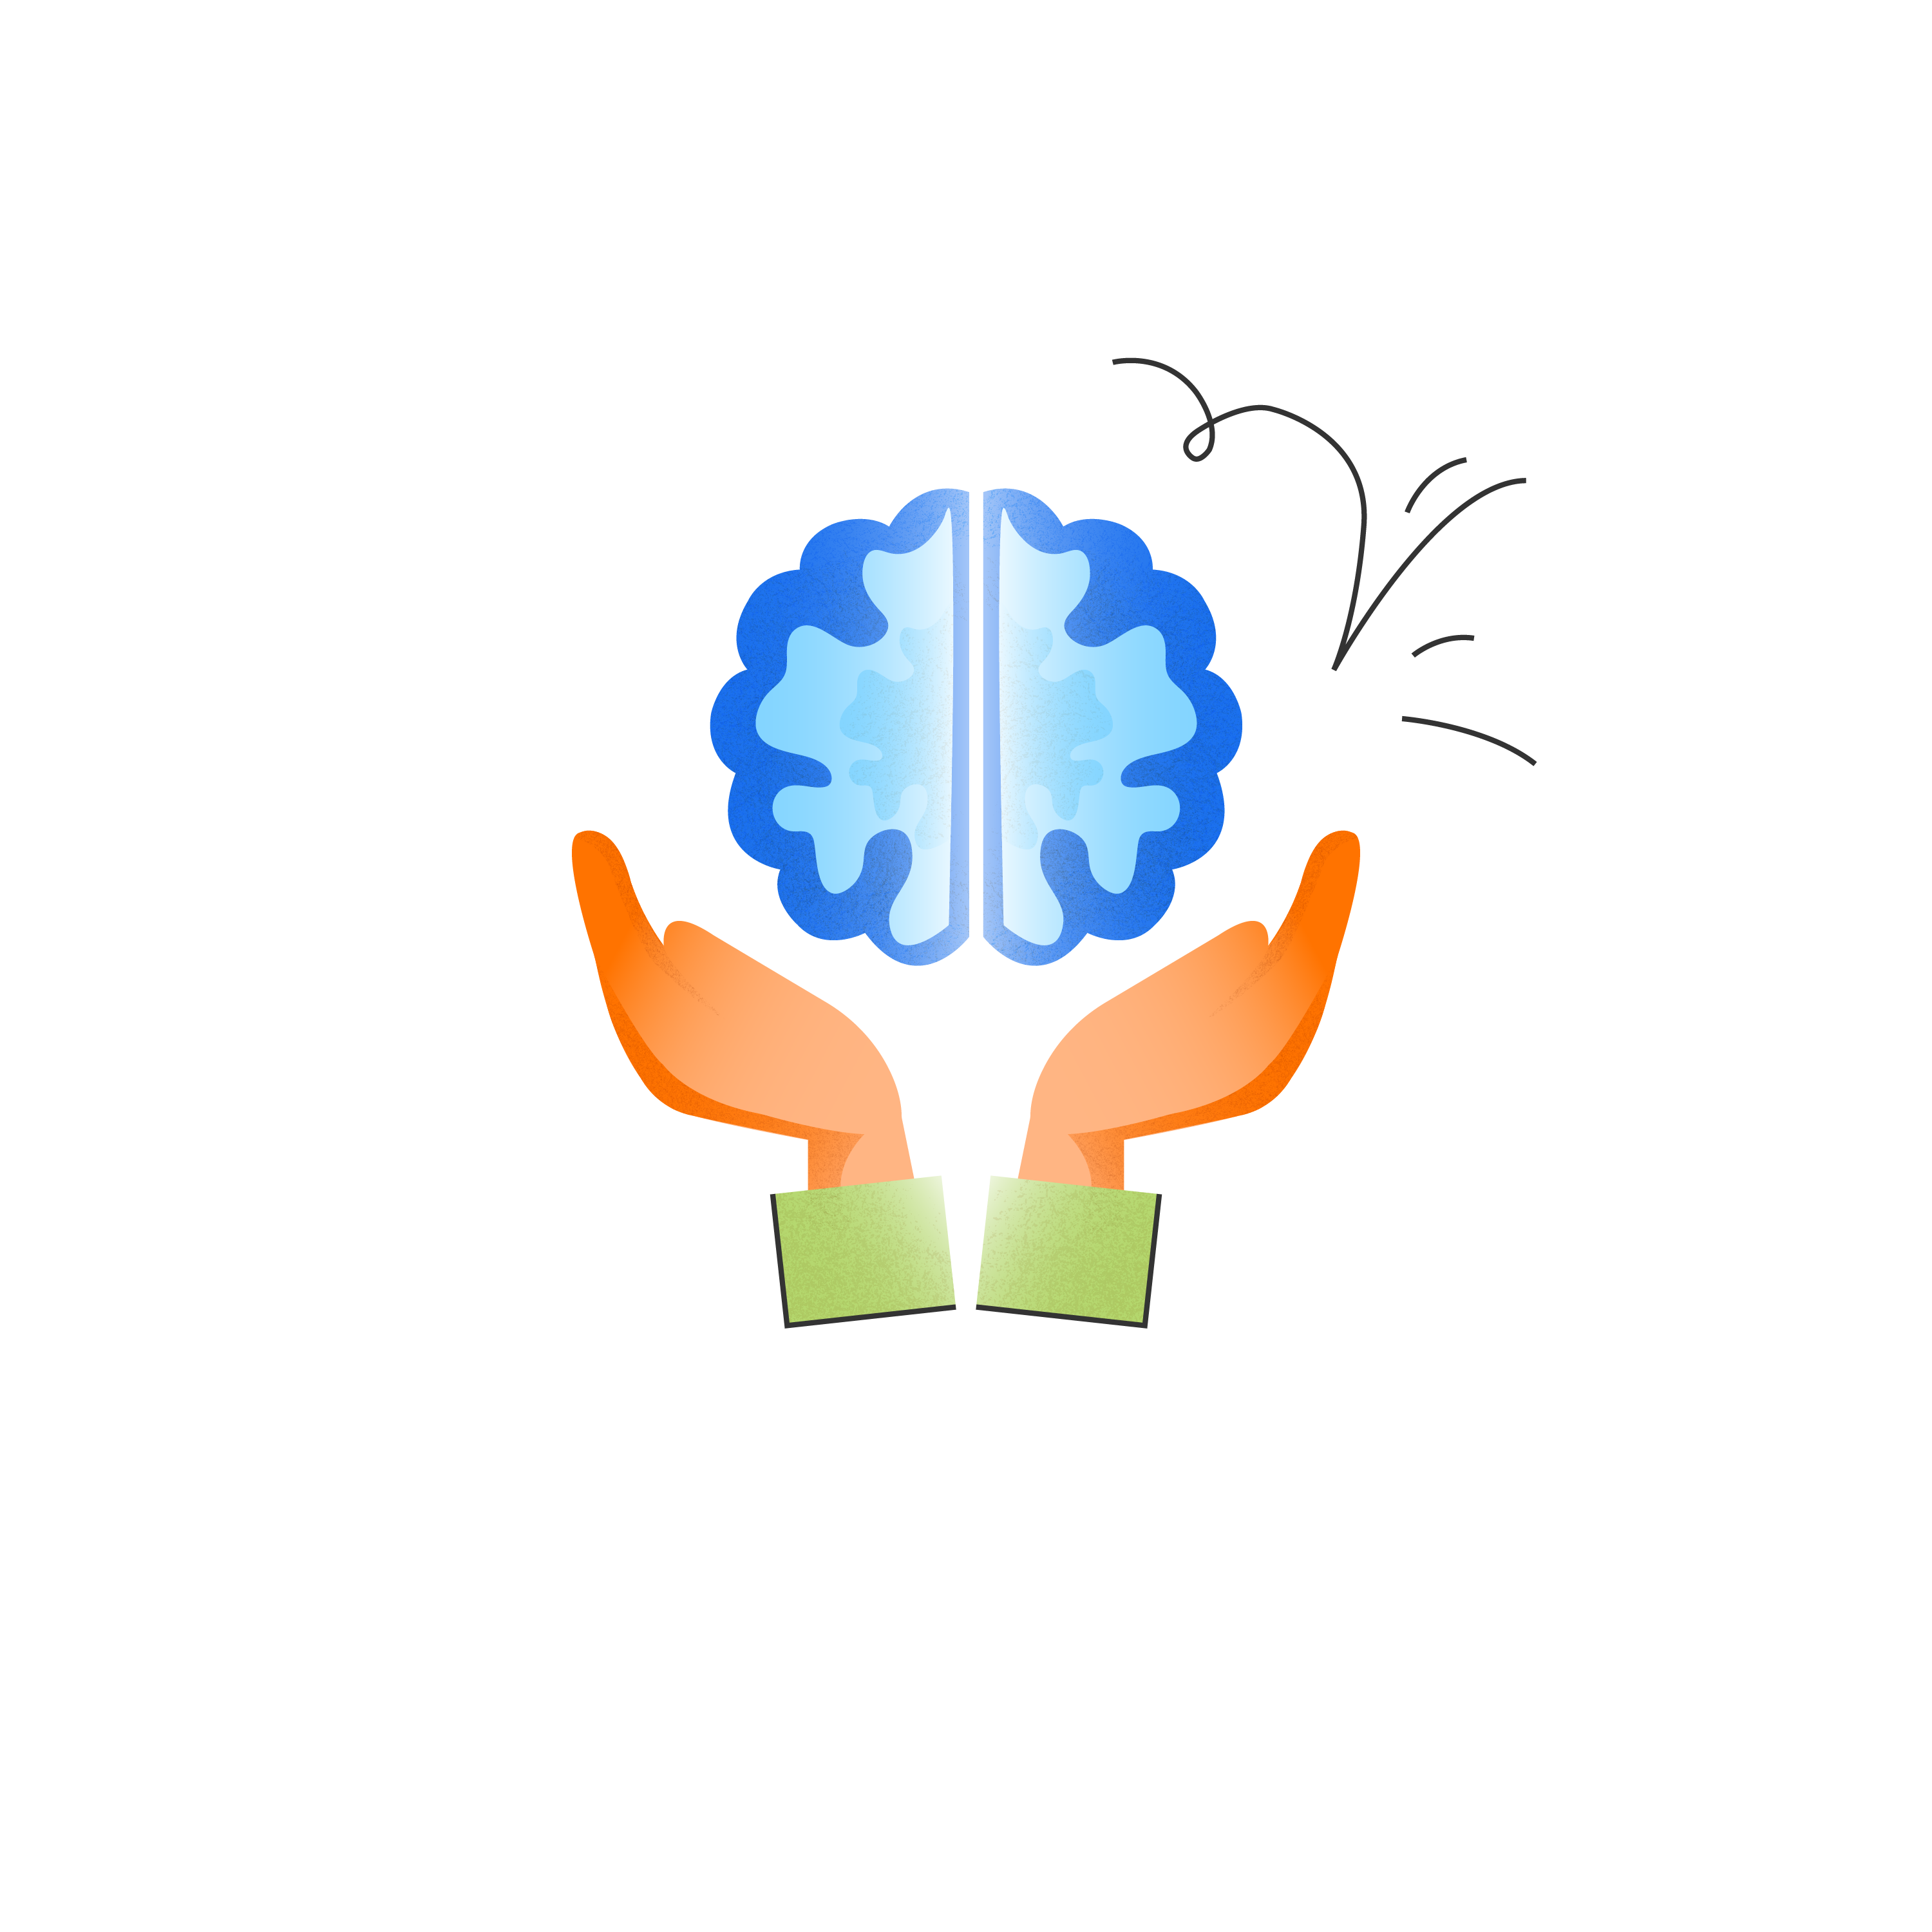 innovation icon - two hands holding up a blue brain